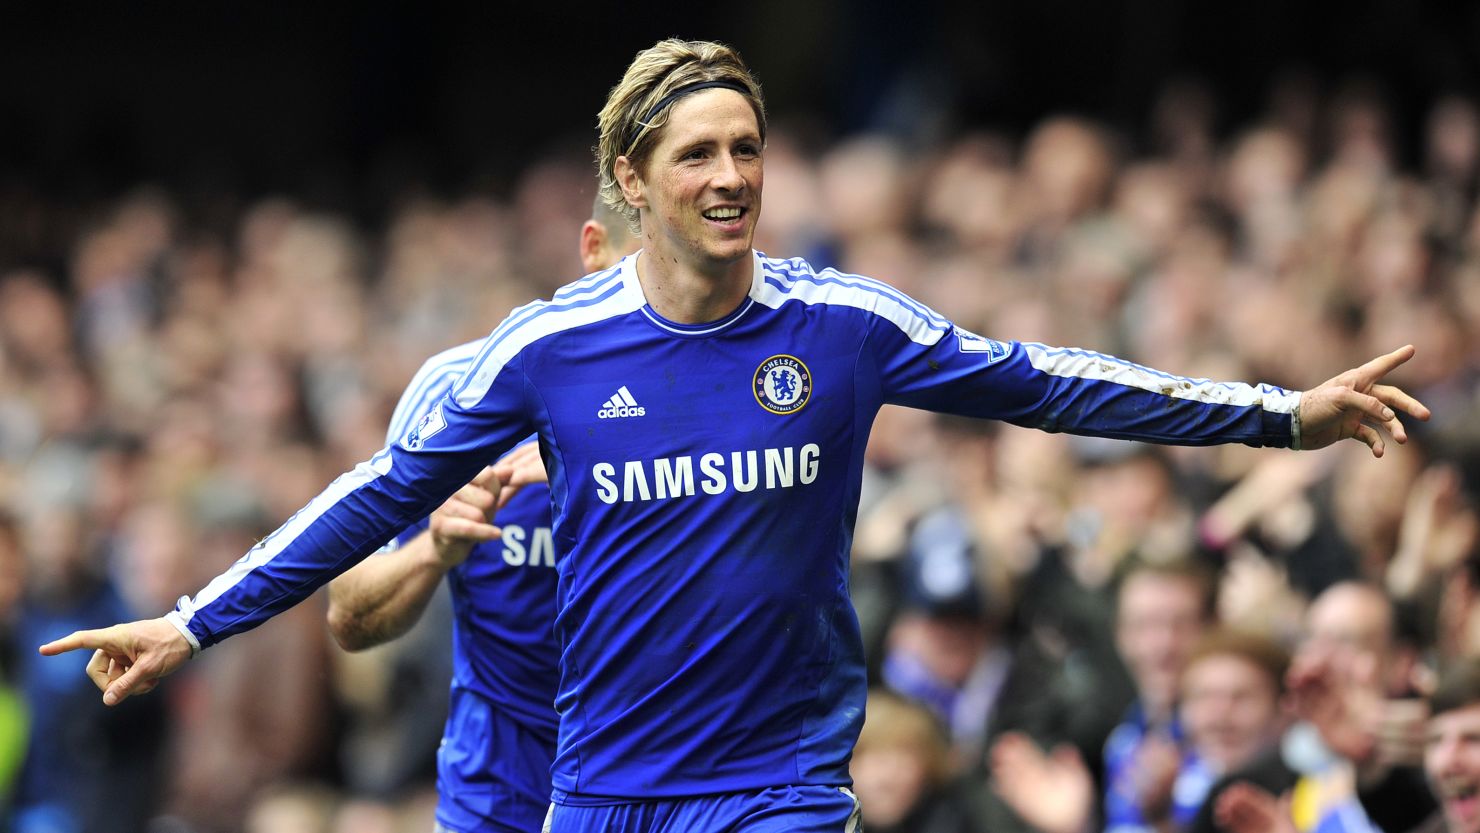 Flying high again: Fernando Torres scored a hat-trick on Sunday capping his best week for Chelsea since arriving last year